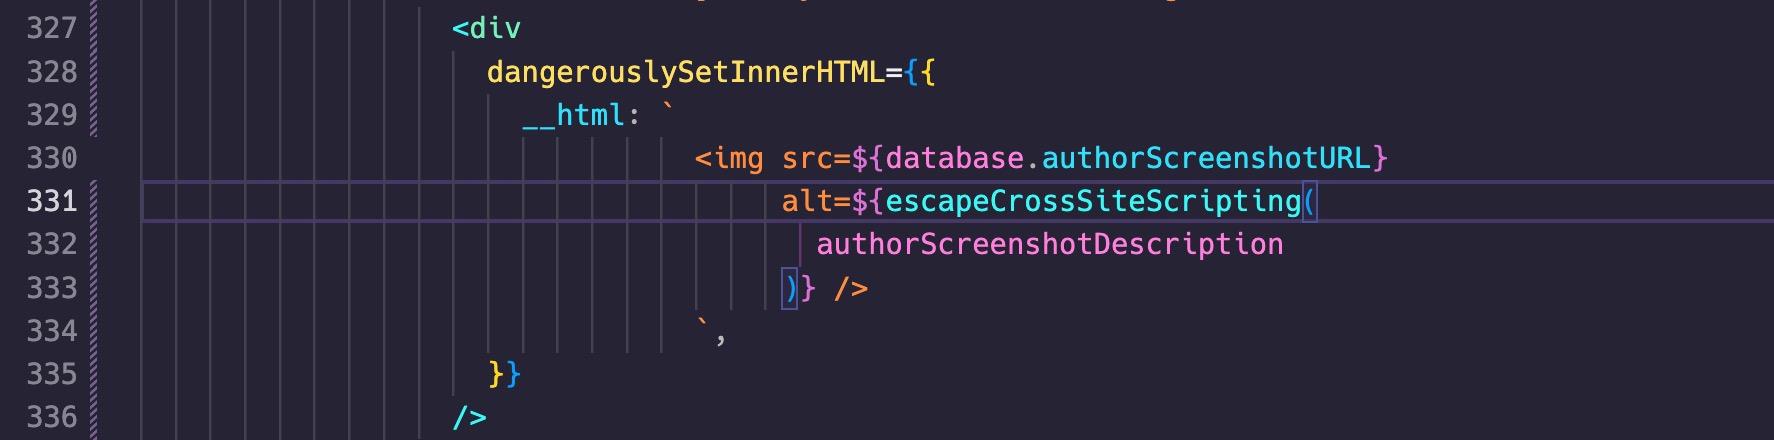 The VS Code IDE shows a React component that uses dangerouslySetInnerHTML API with an image source and alt attributes from user input.